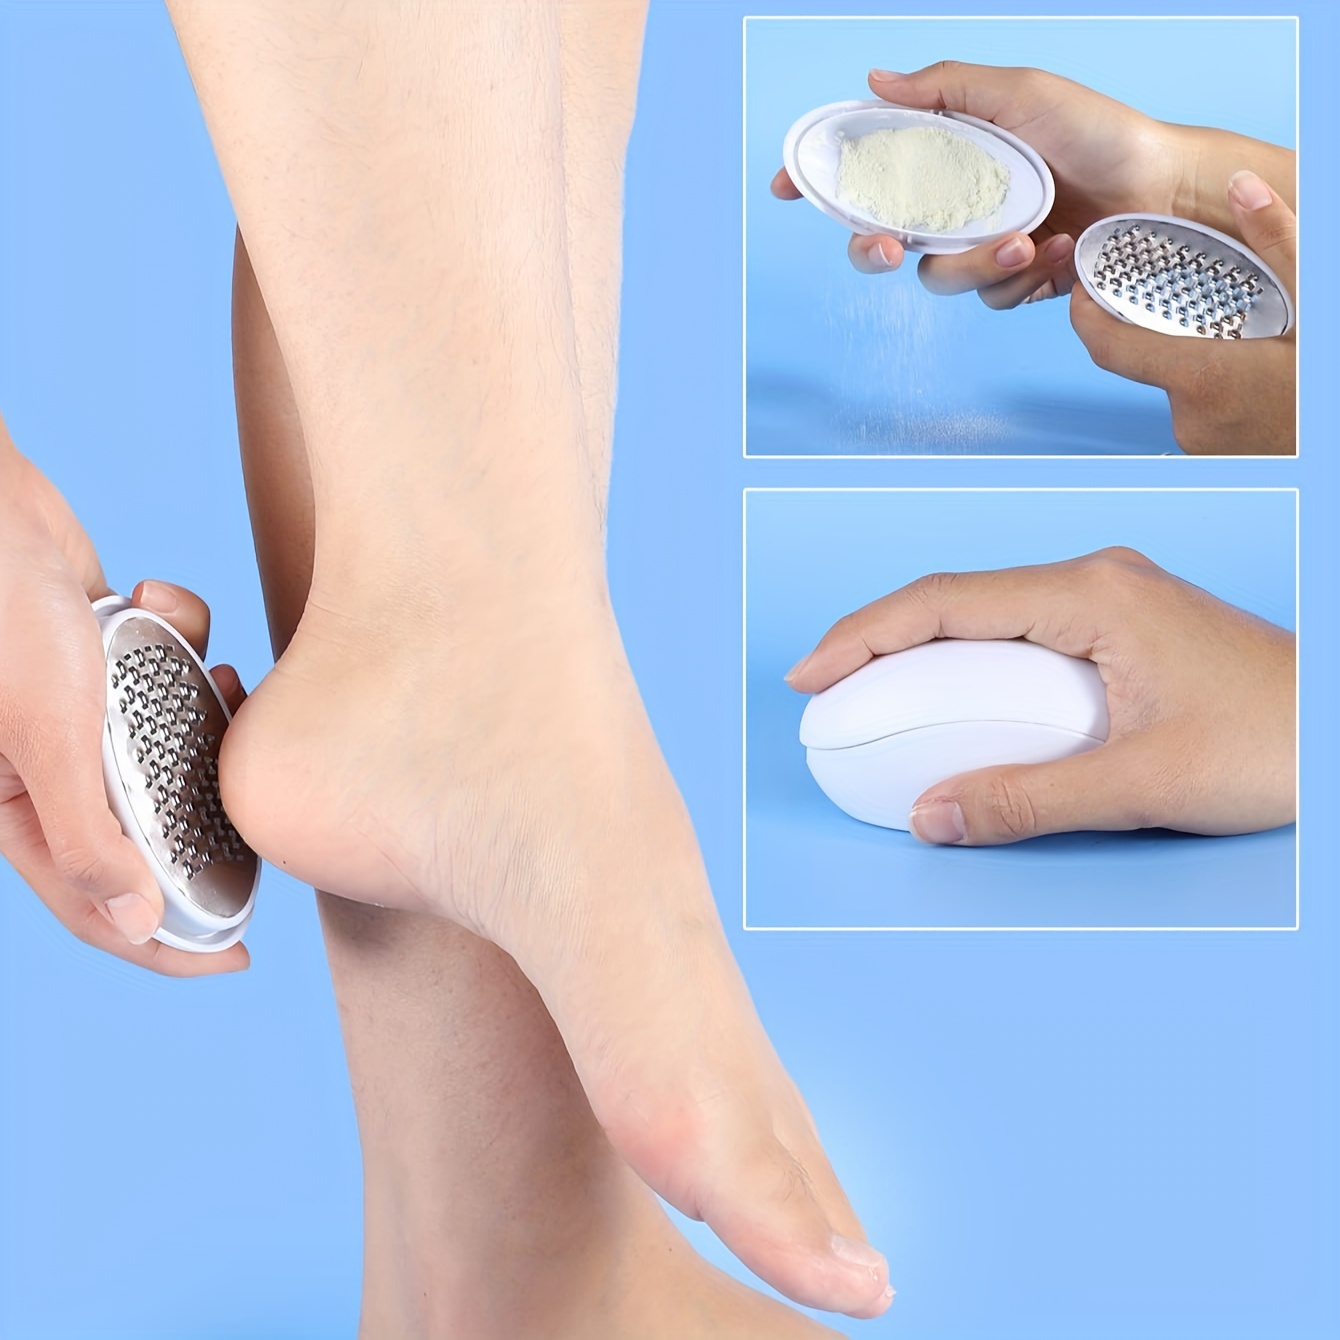 Callous Removers For Feet Metal Foot File Pedegg For Feet - AliExpress